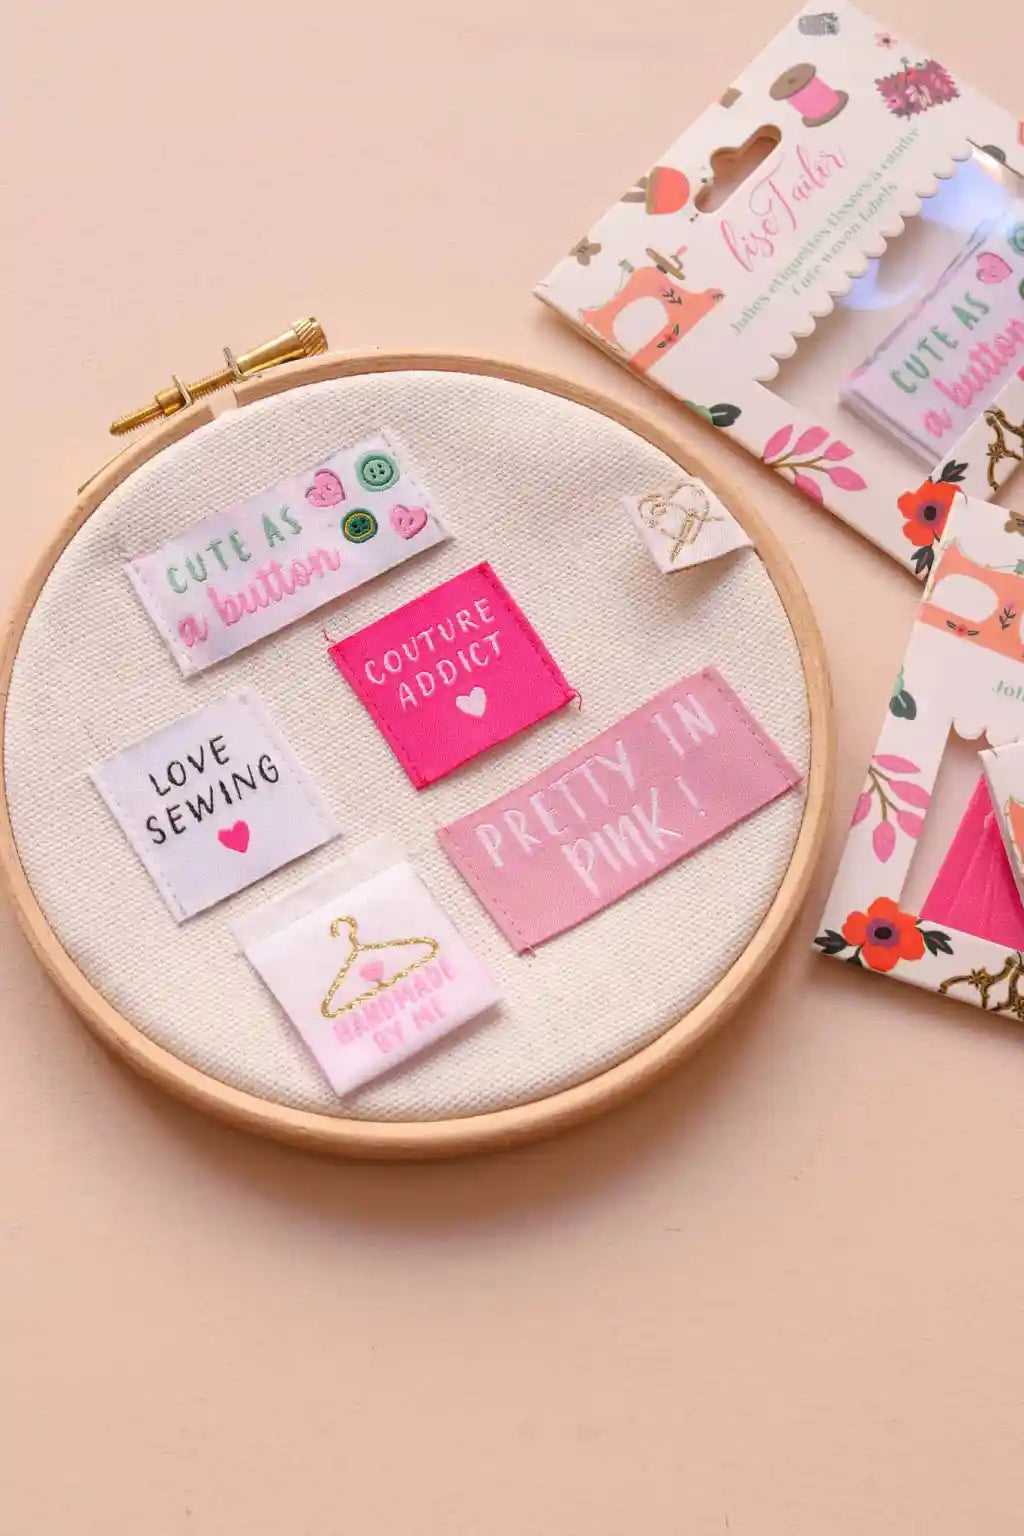 Lise Tailor - Pretty in Pink - Woven Sewing Labels